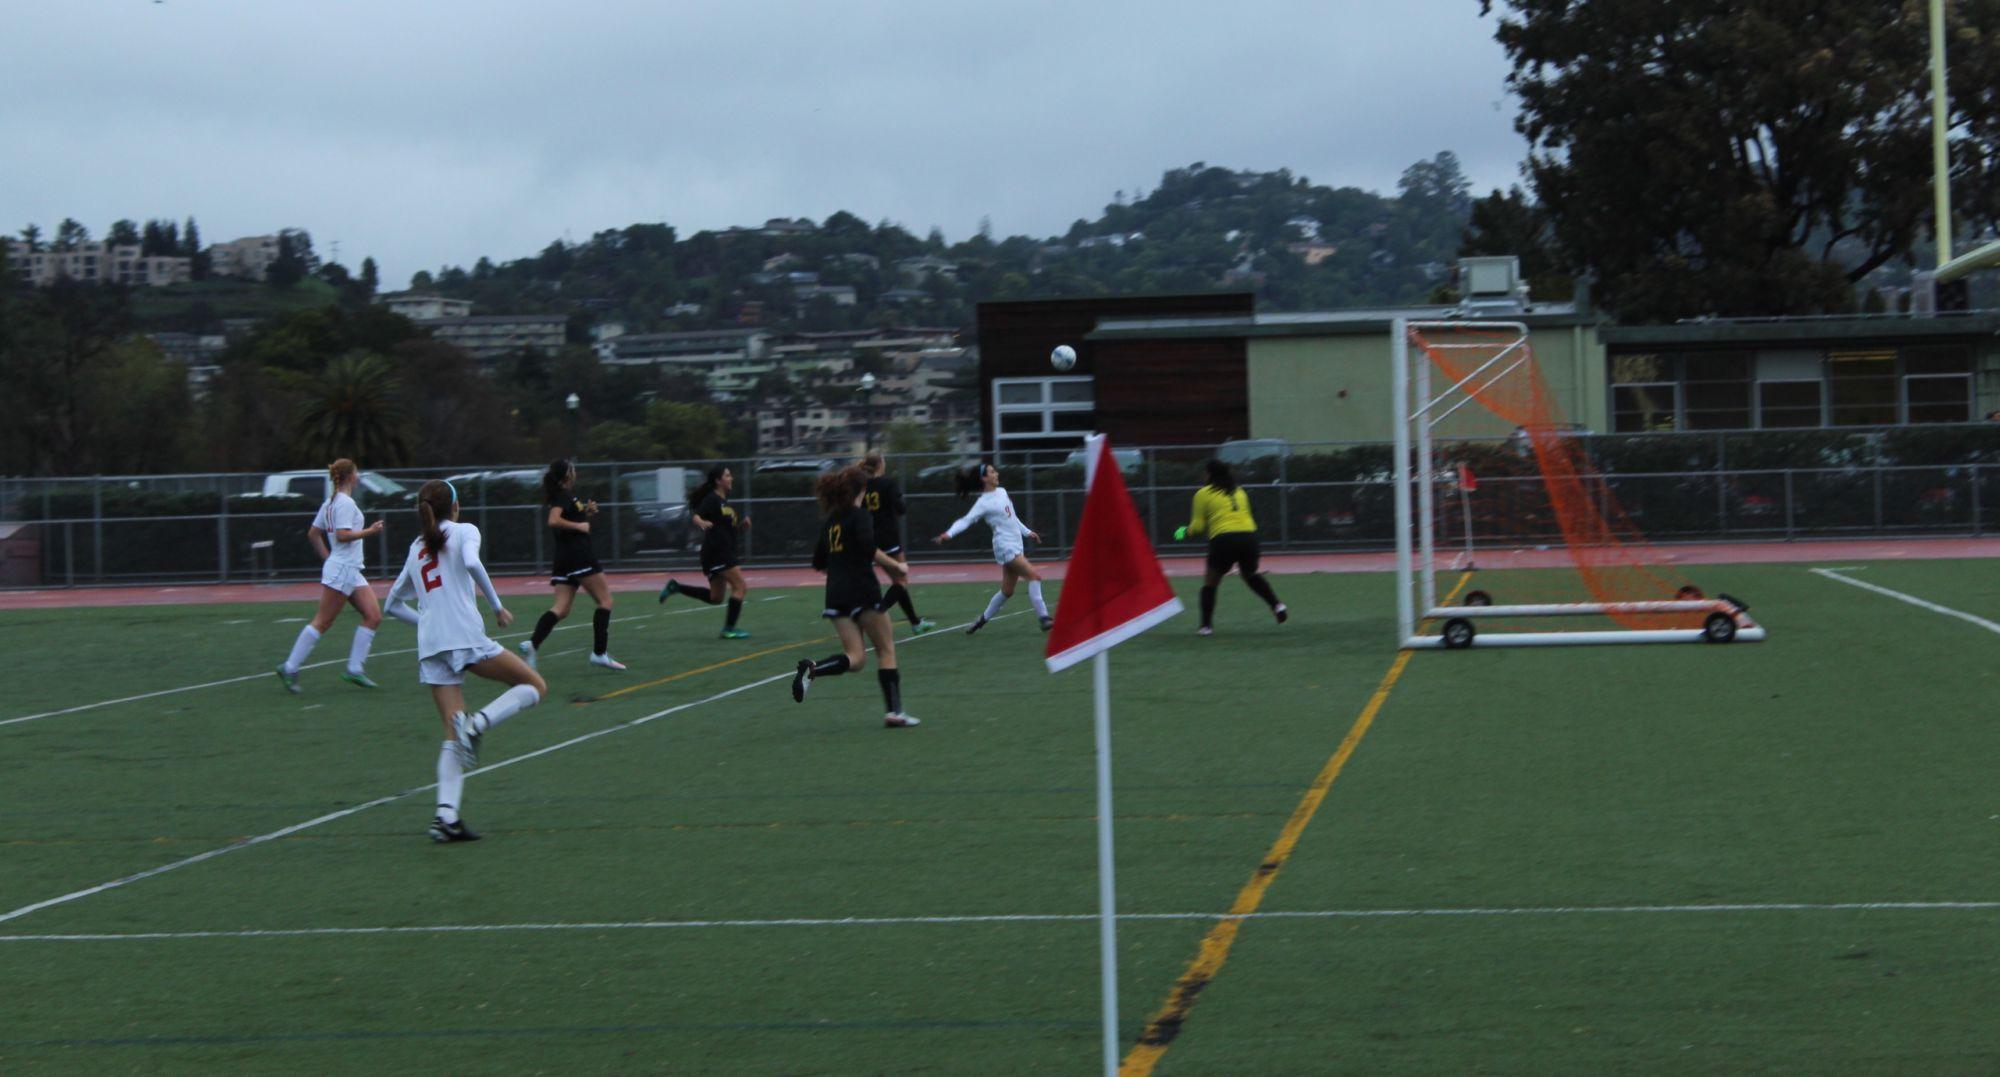 Sprinting down the field, junior Hannah Halford attempts a shot on goal.